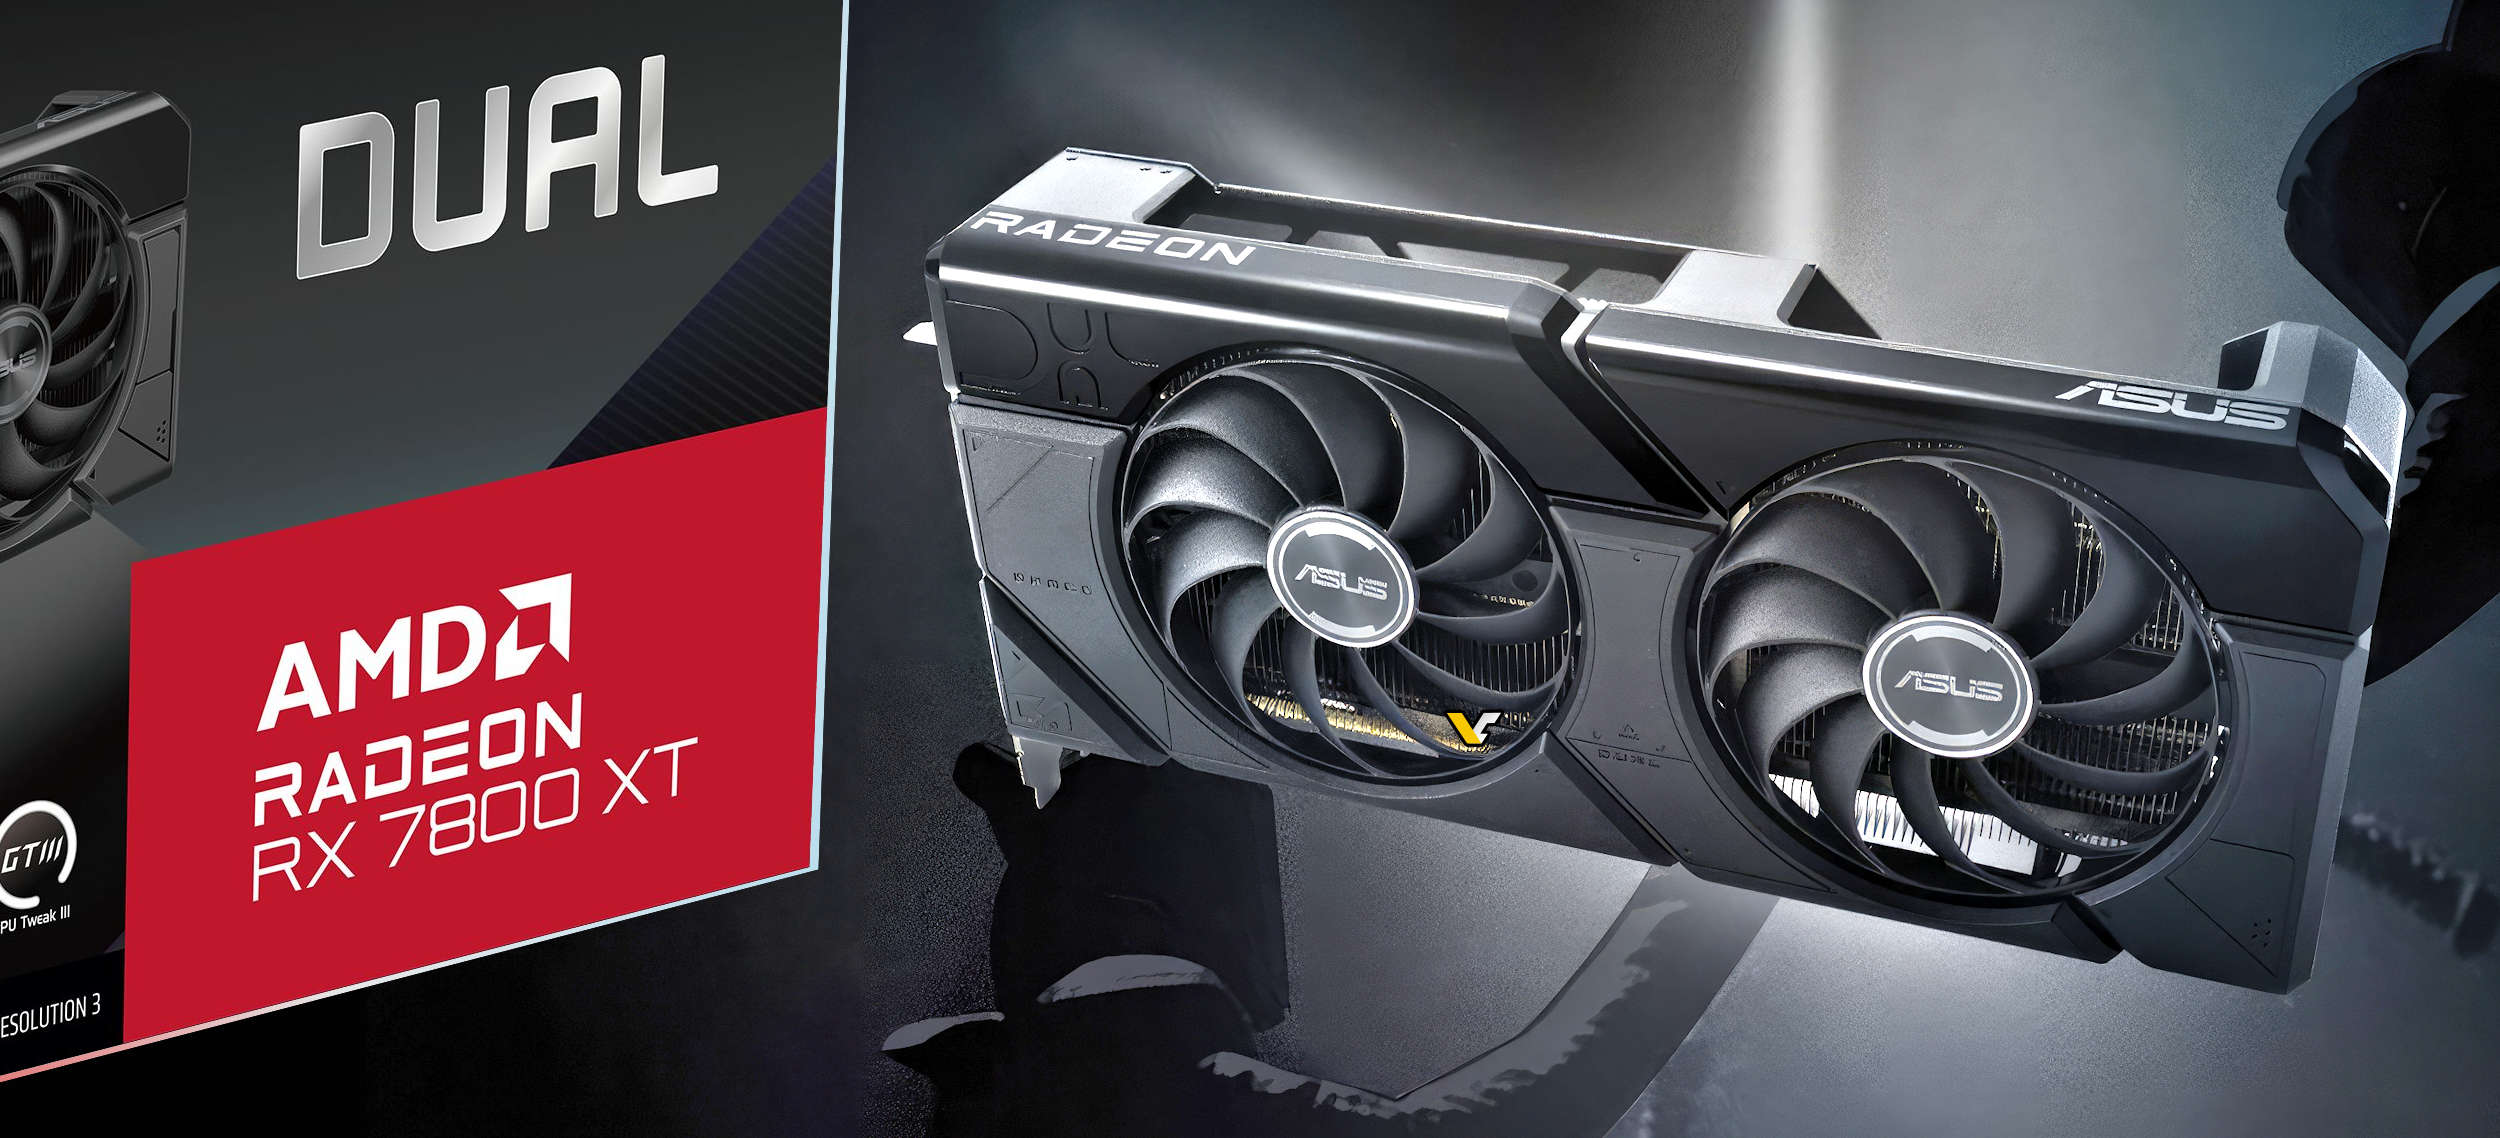 ASUS launches Radeon RX 7700XT/7800XT DUAL graphics cards